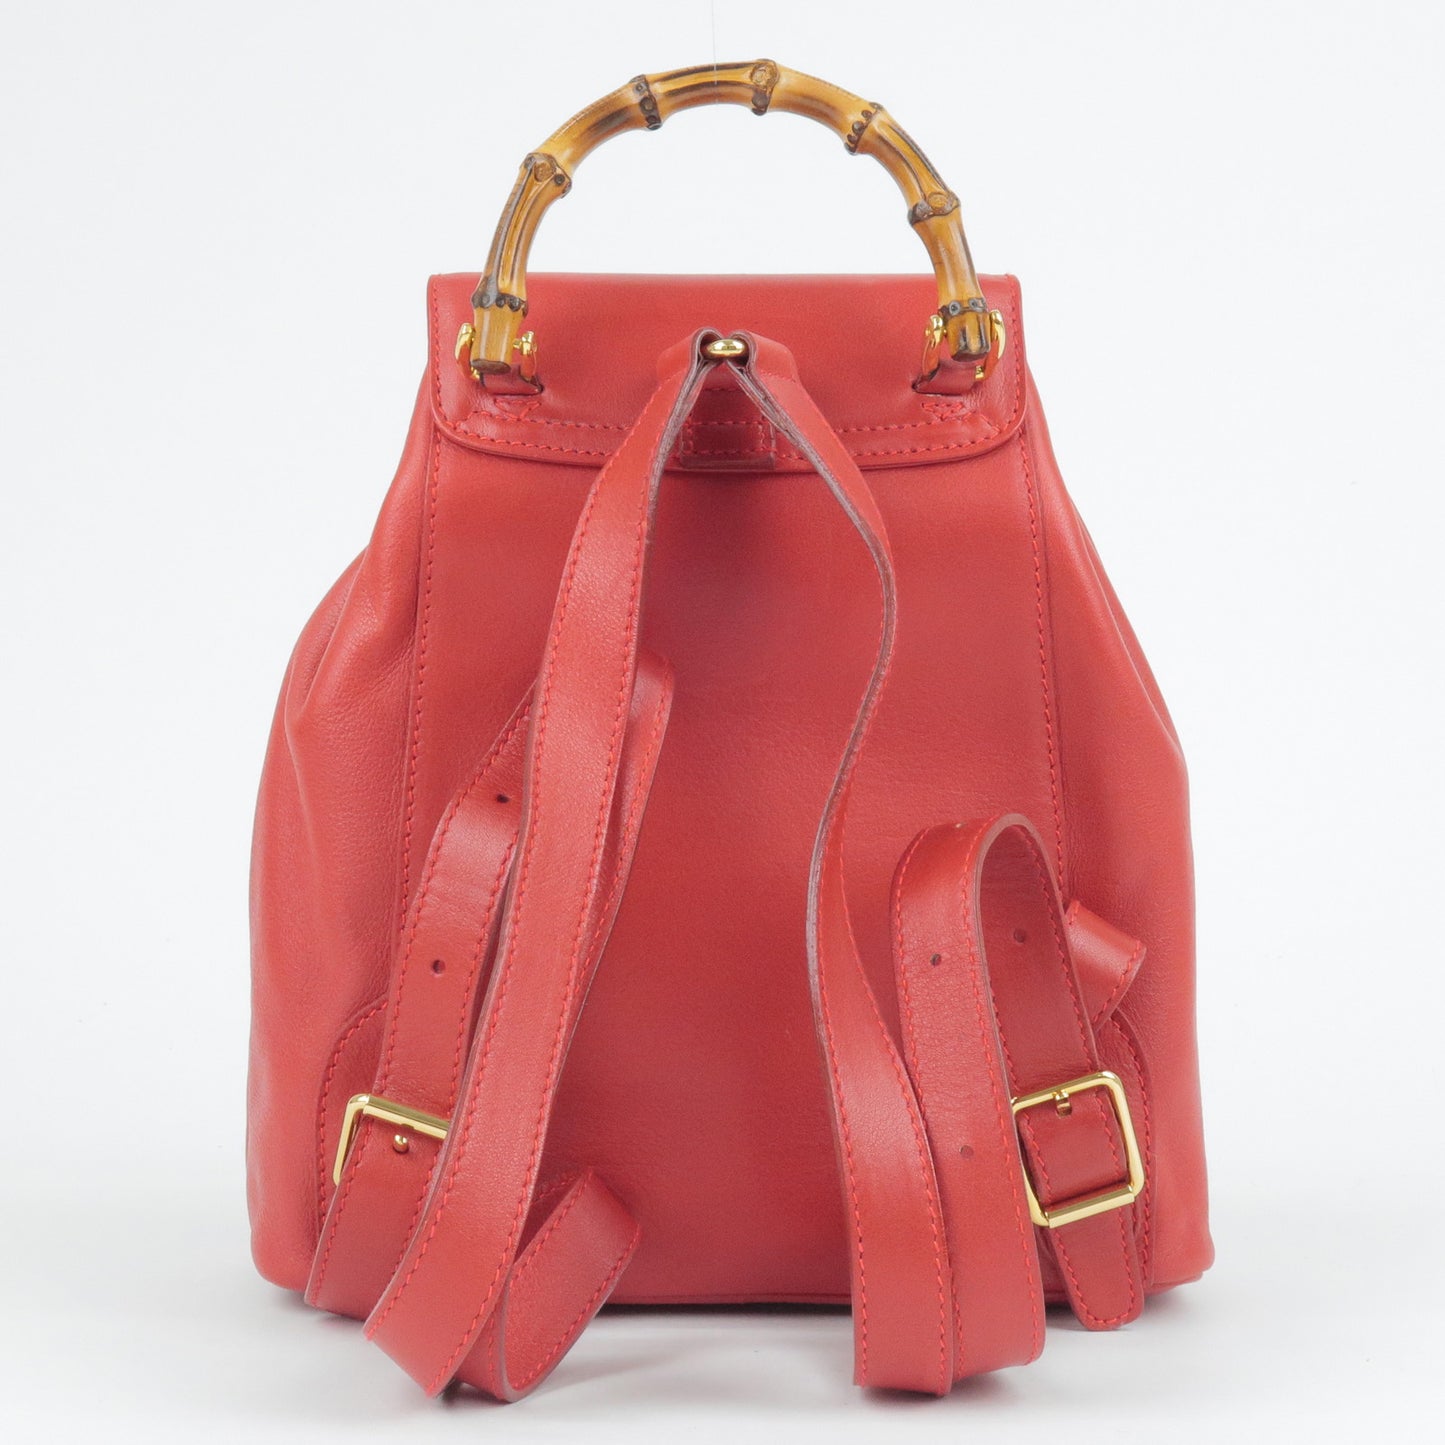 GUCCI Bamboo Leather Back Pack Ruck Sack Red 003.3444.0030